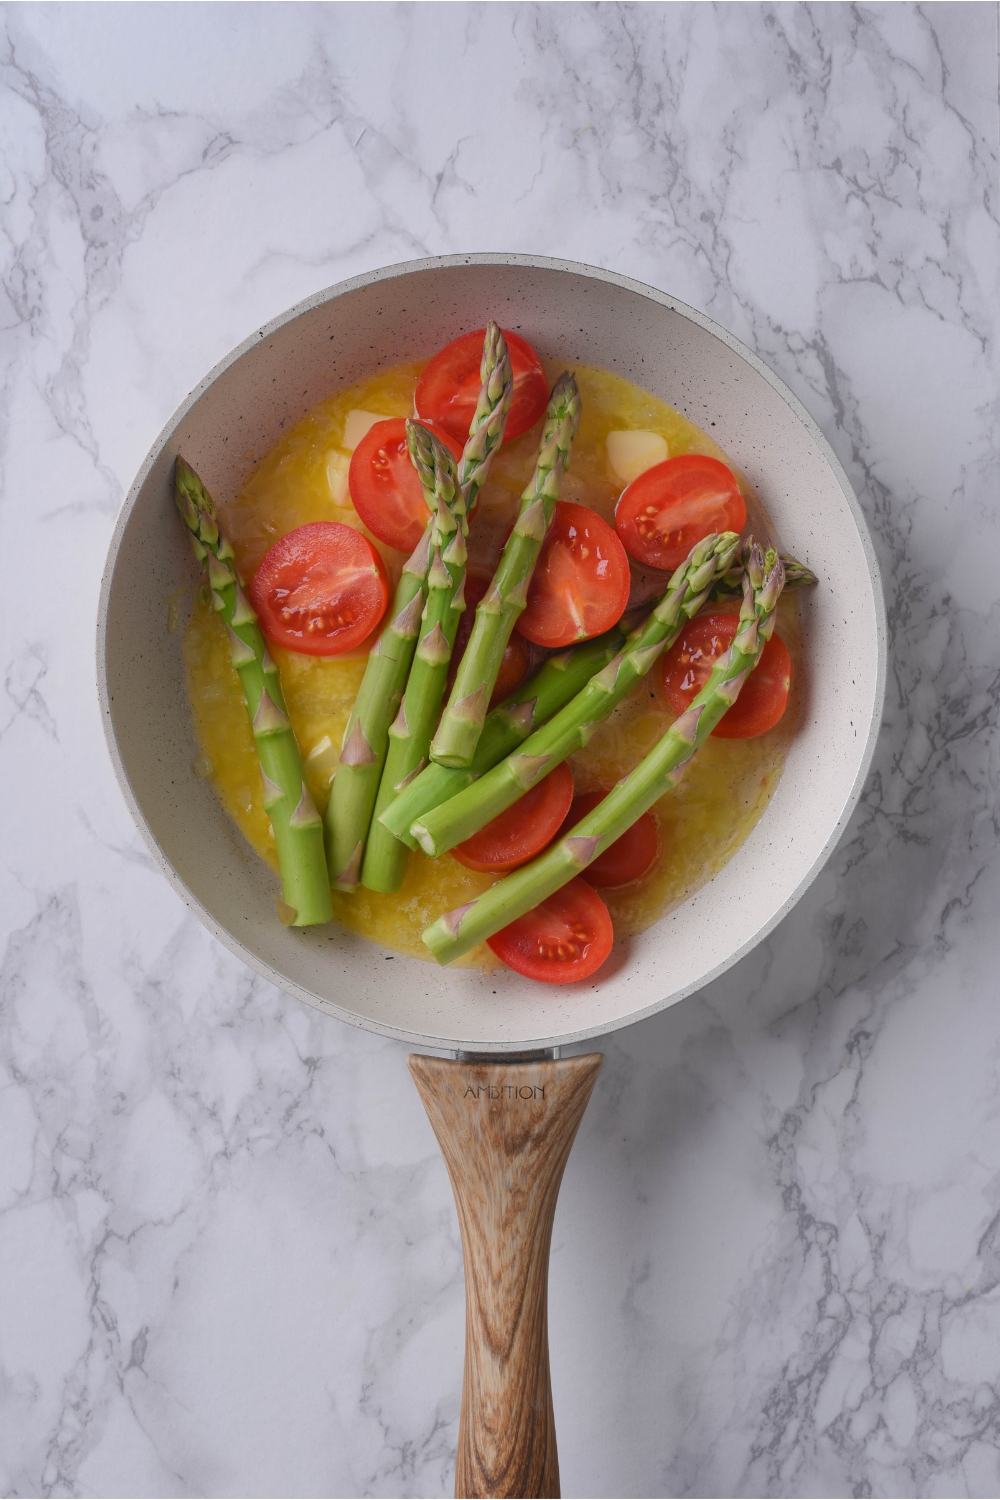 A grey skillet with melted butter, cherry tomatoes, and asparagus in it.